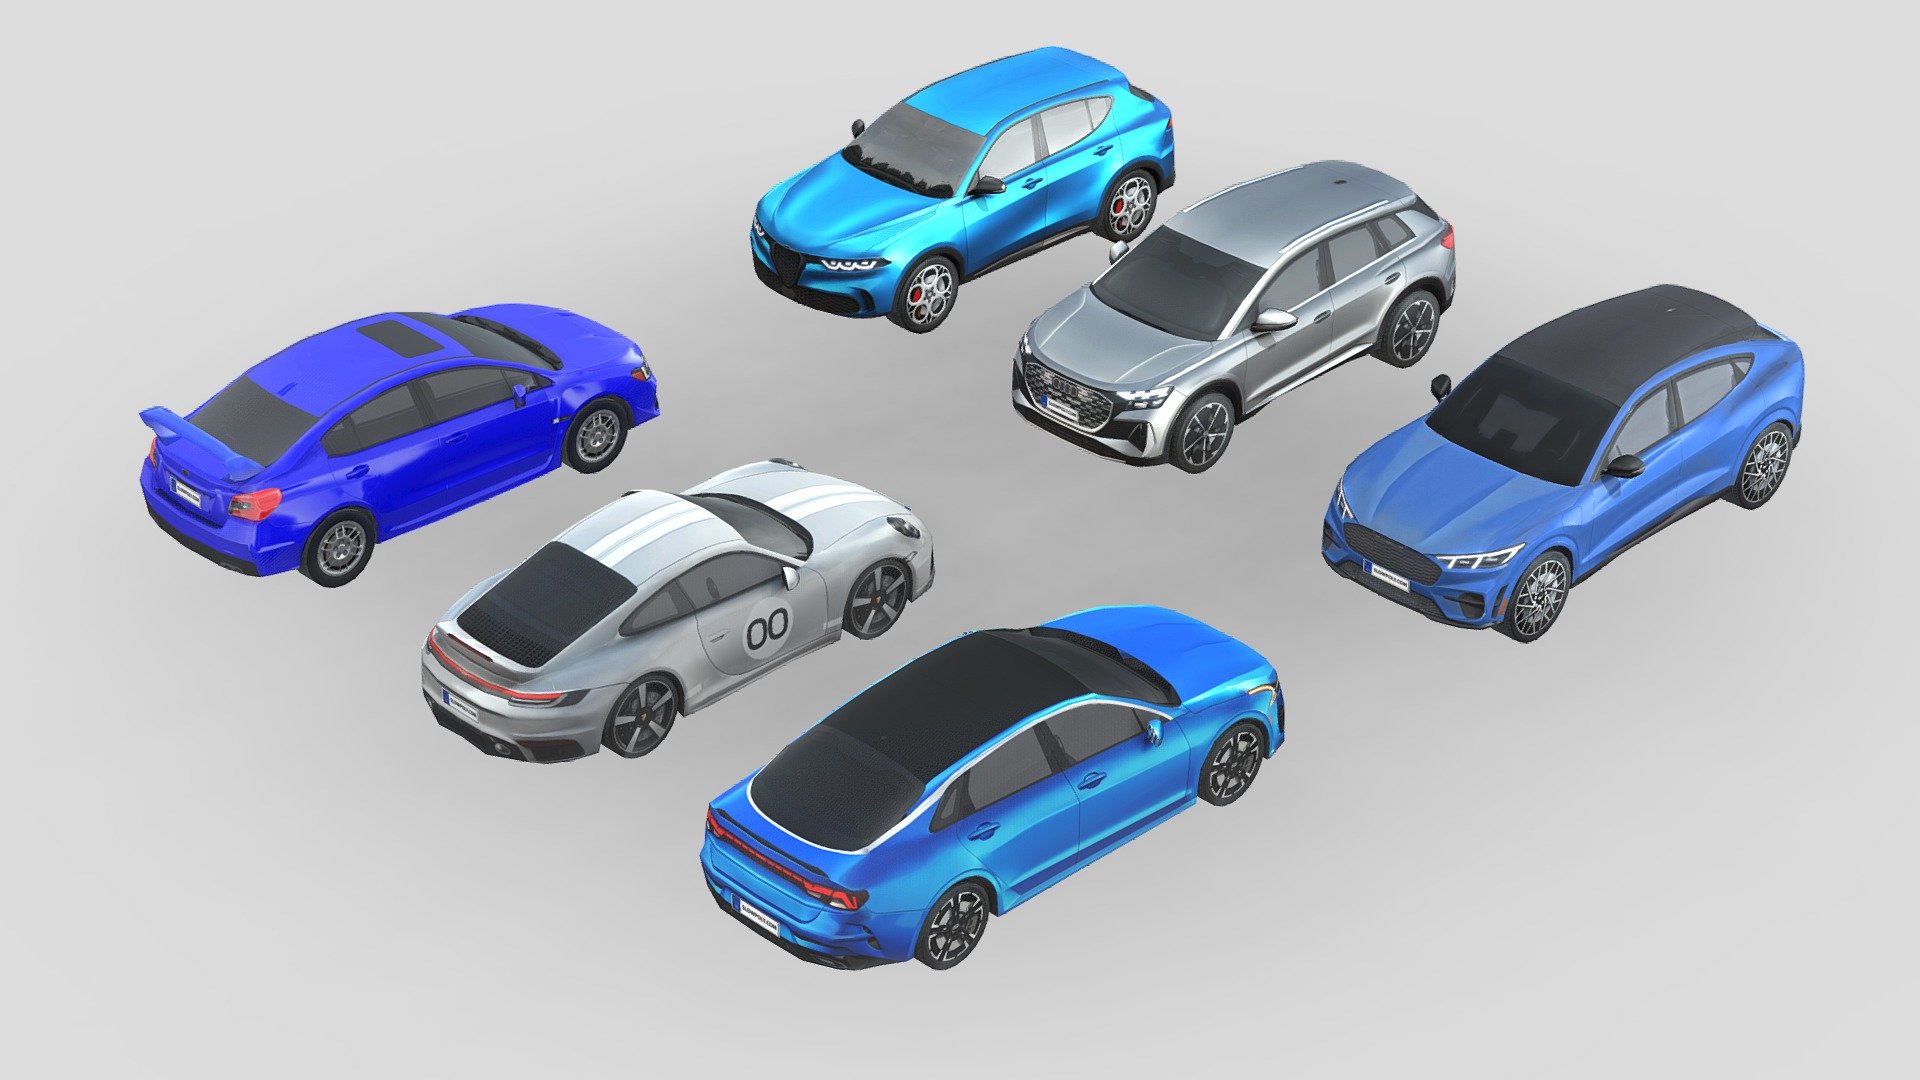 Our best low-poly car collection! Each car in this collection is carefully crafted, offering perfect topology and geometry. This ensures seamless integration into your projects.

With a low-poly concept, all cars deliver a visually stunning experience, complete with amazing details. This is made possible by pre-rendered textures that enhance realism optimally.

What’s included in this collection: - Alfa Romeo Tonale 2023 - Audi Q4 e-tron - Ford Mustang Mach-E GT 2021 -Kia K5 2022 - Porsche 911 Sport Classic 2023 - Subaru Impreza WRX STI 2015

By purchasing this collection, you will get high-quality low-poly assets, a perfect blend of quality and unbeatable affordability! - Low-Poly Car Pack 007 - Sporty Selection - Buy Royalty Free 3D model by slowpoly 3d model